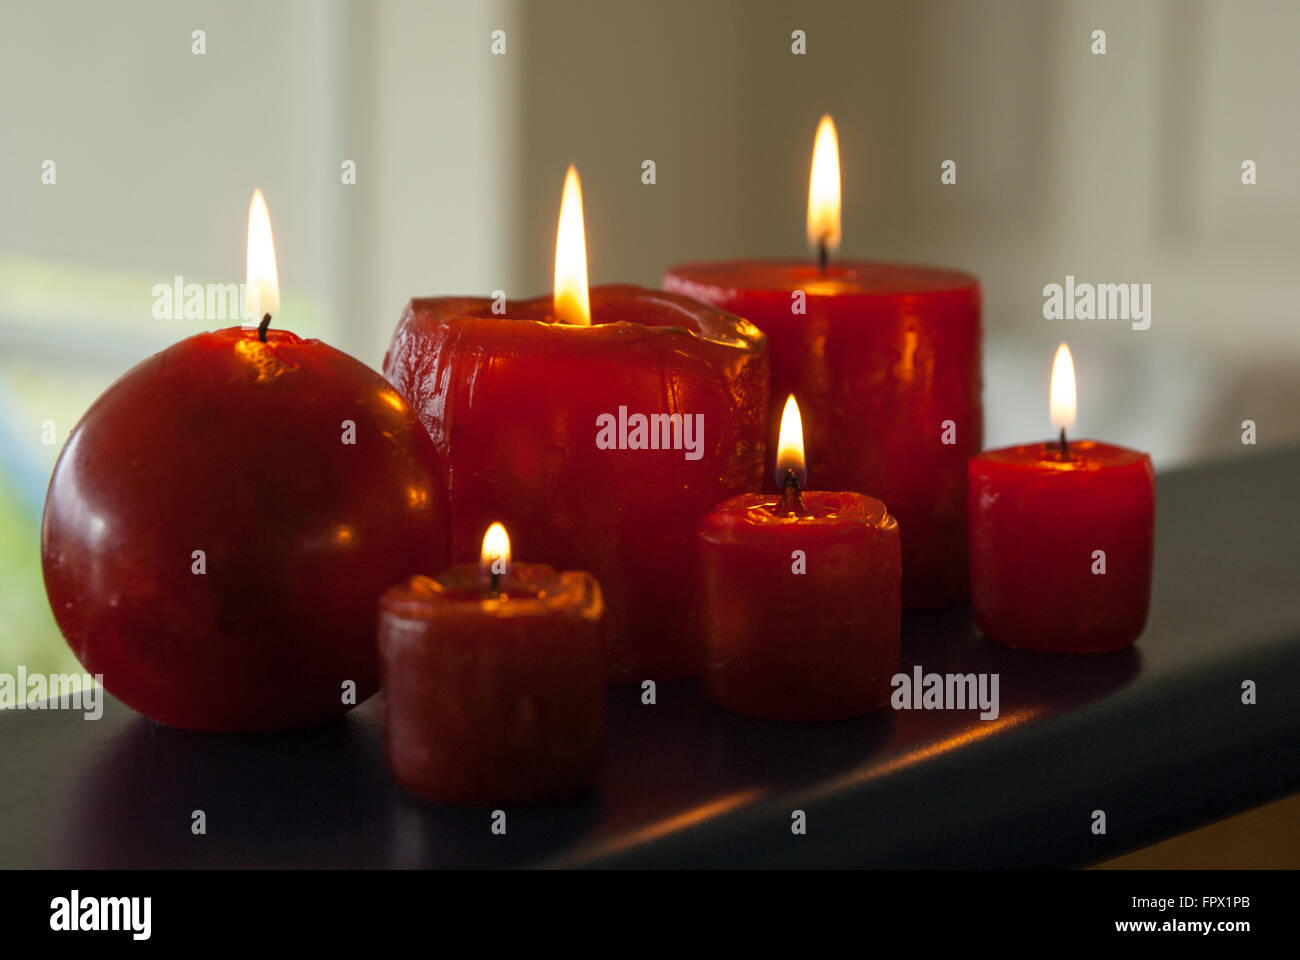 Six red candles burning in low light Stock Photo